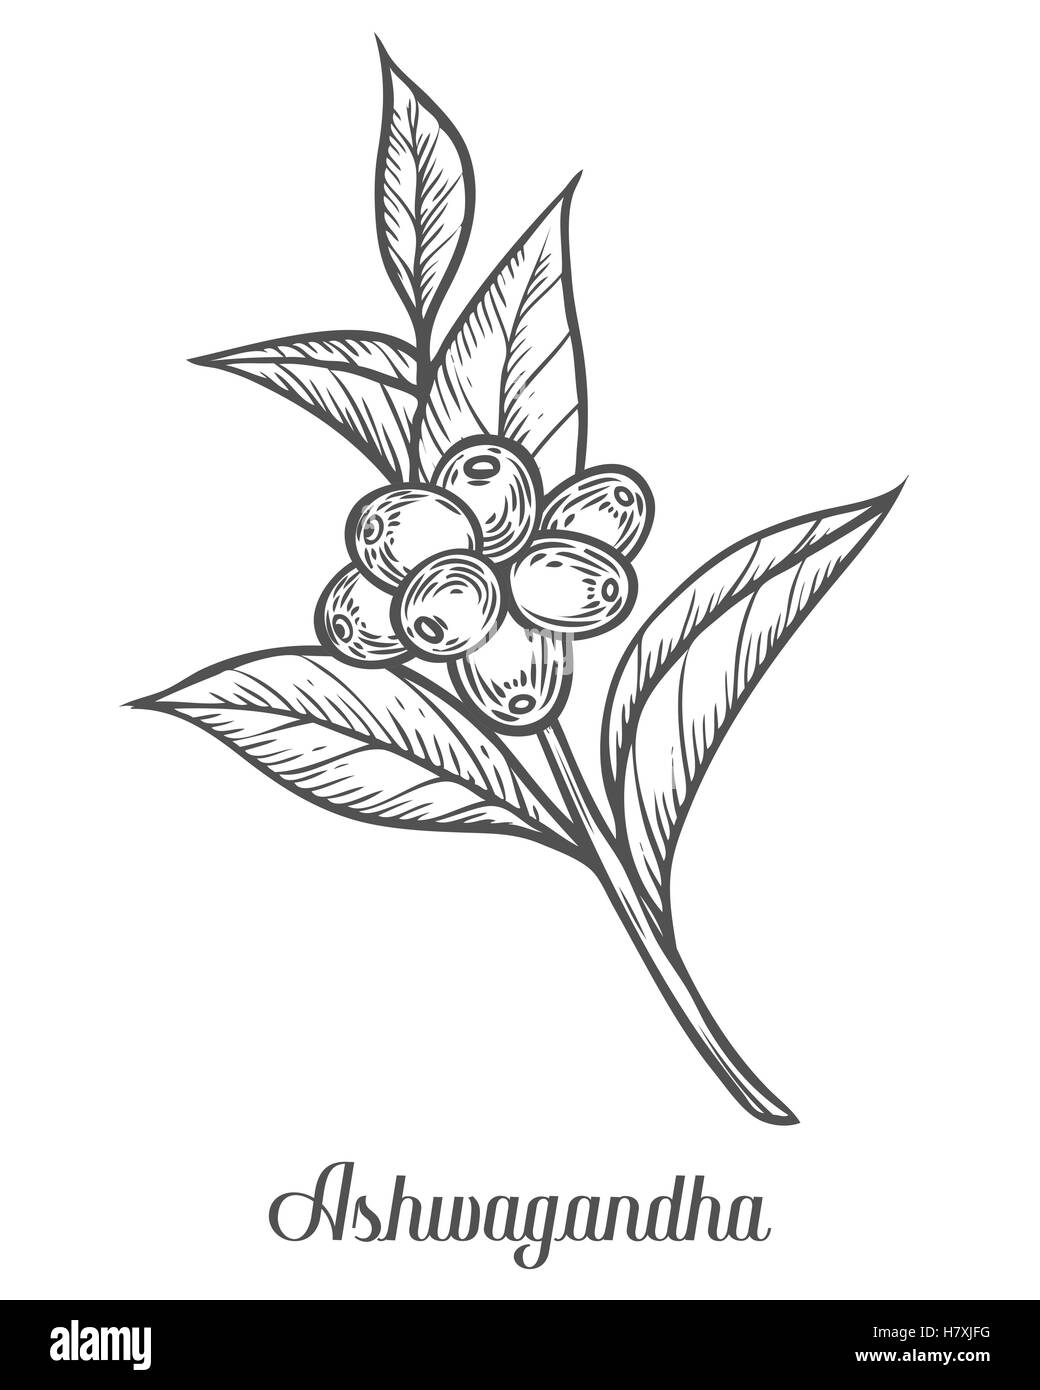 Ayurvedic Herb Withania somnifera, known as ashwagandha, Indian ginseng, poison gooseberry, or winter cherry. Hand drawn engrave Stock Vector